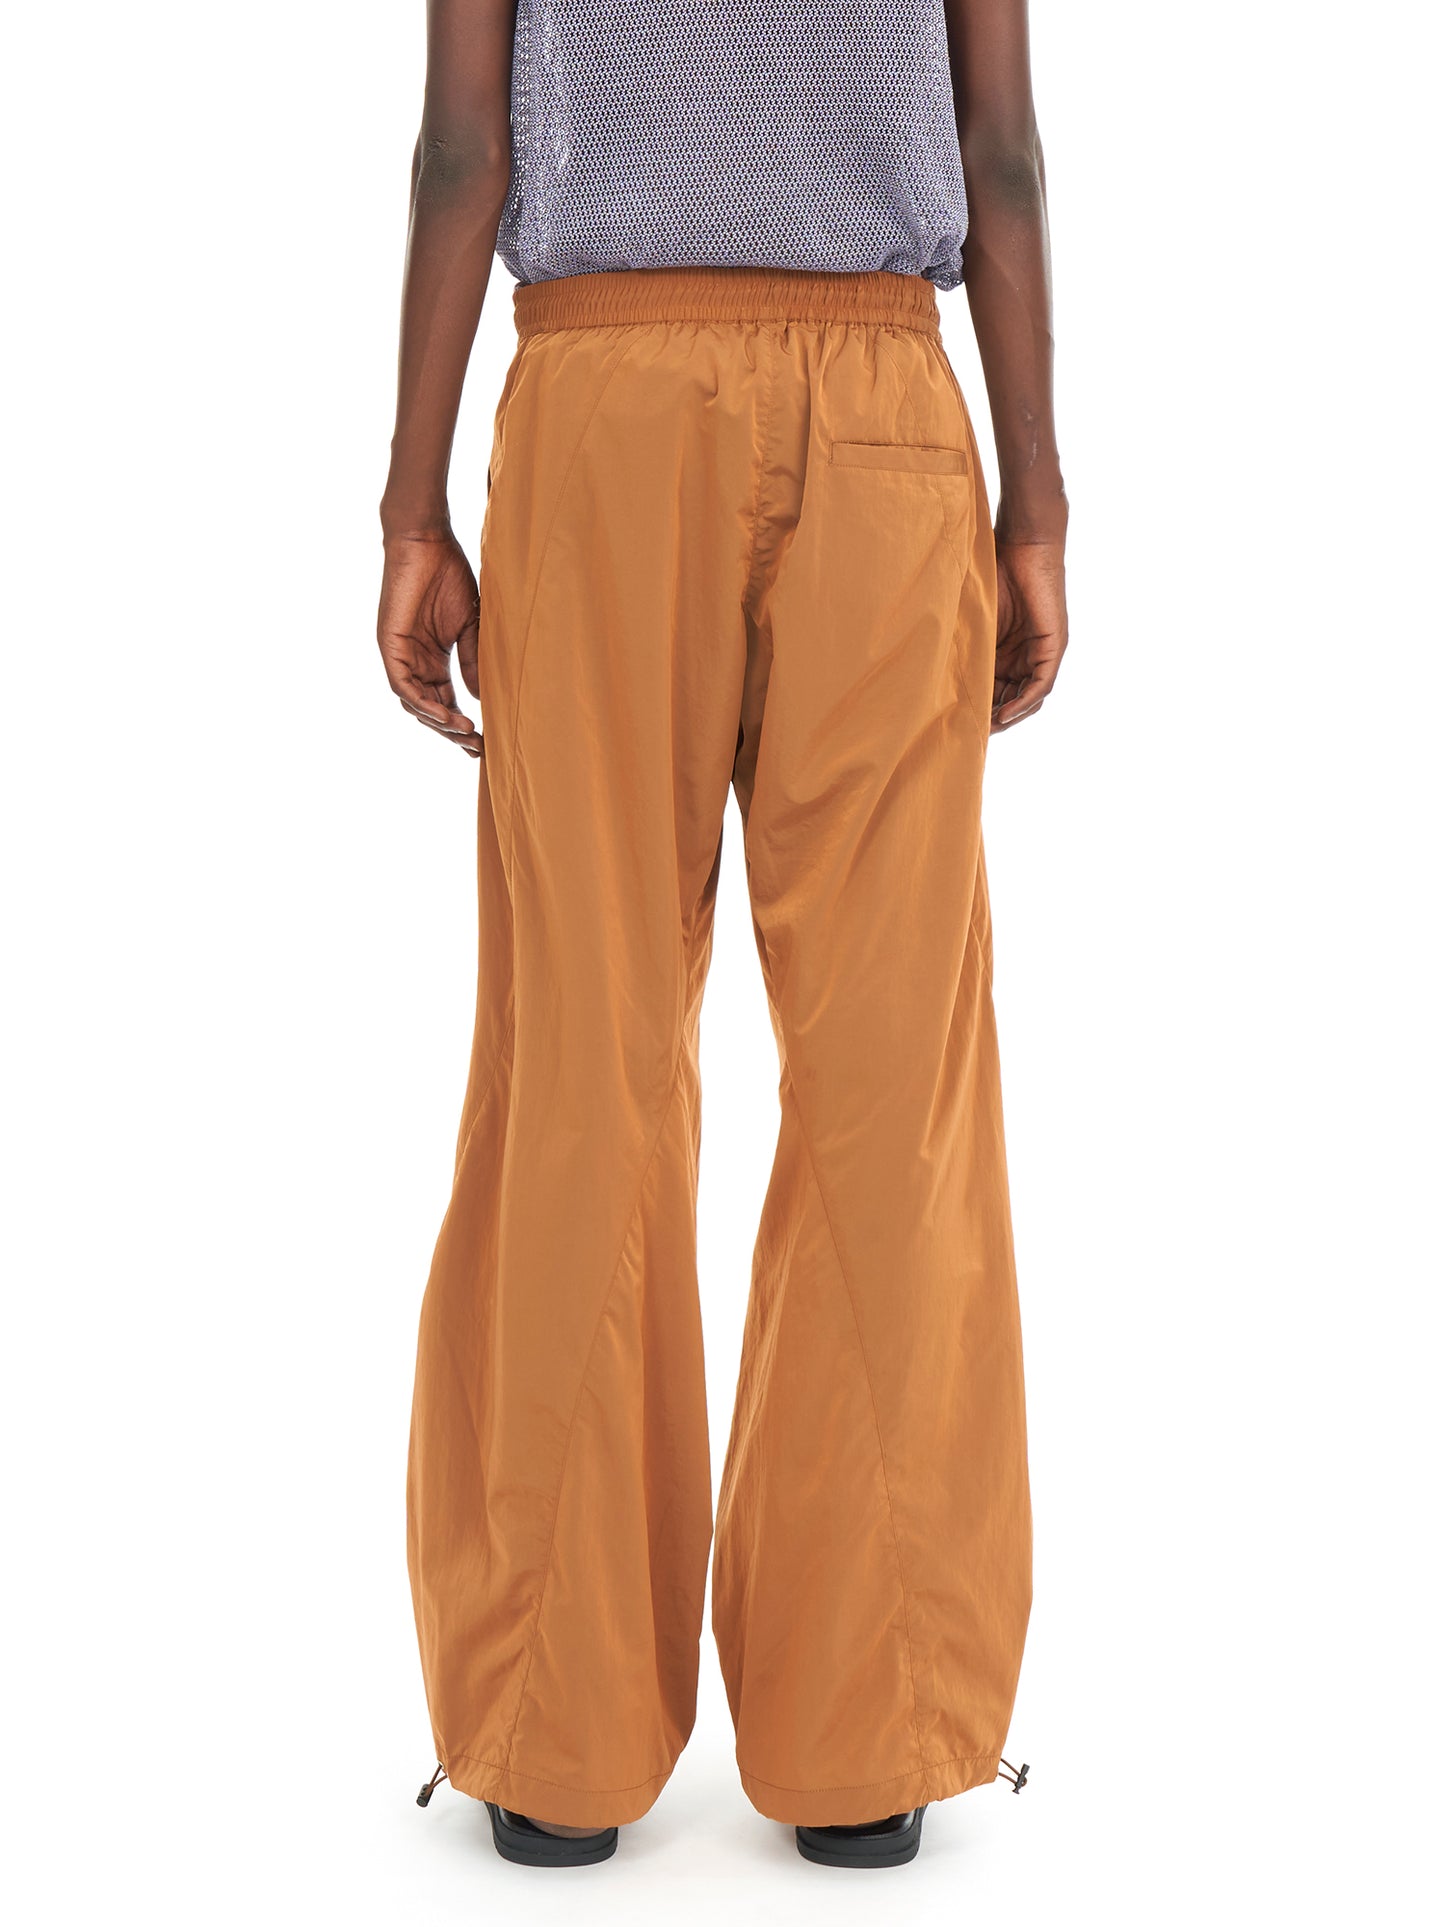 TWISTED NYLON TRUCK PANTS #BROWN [241-01-0201]